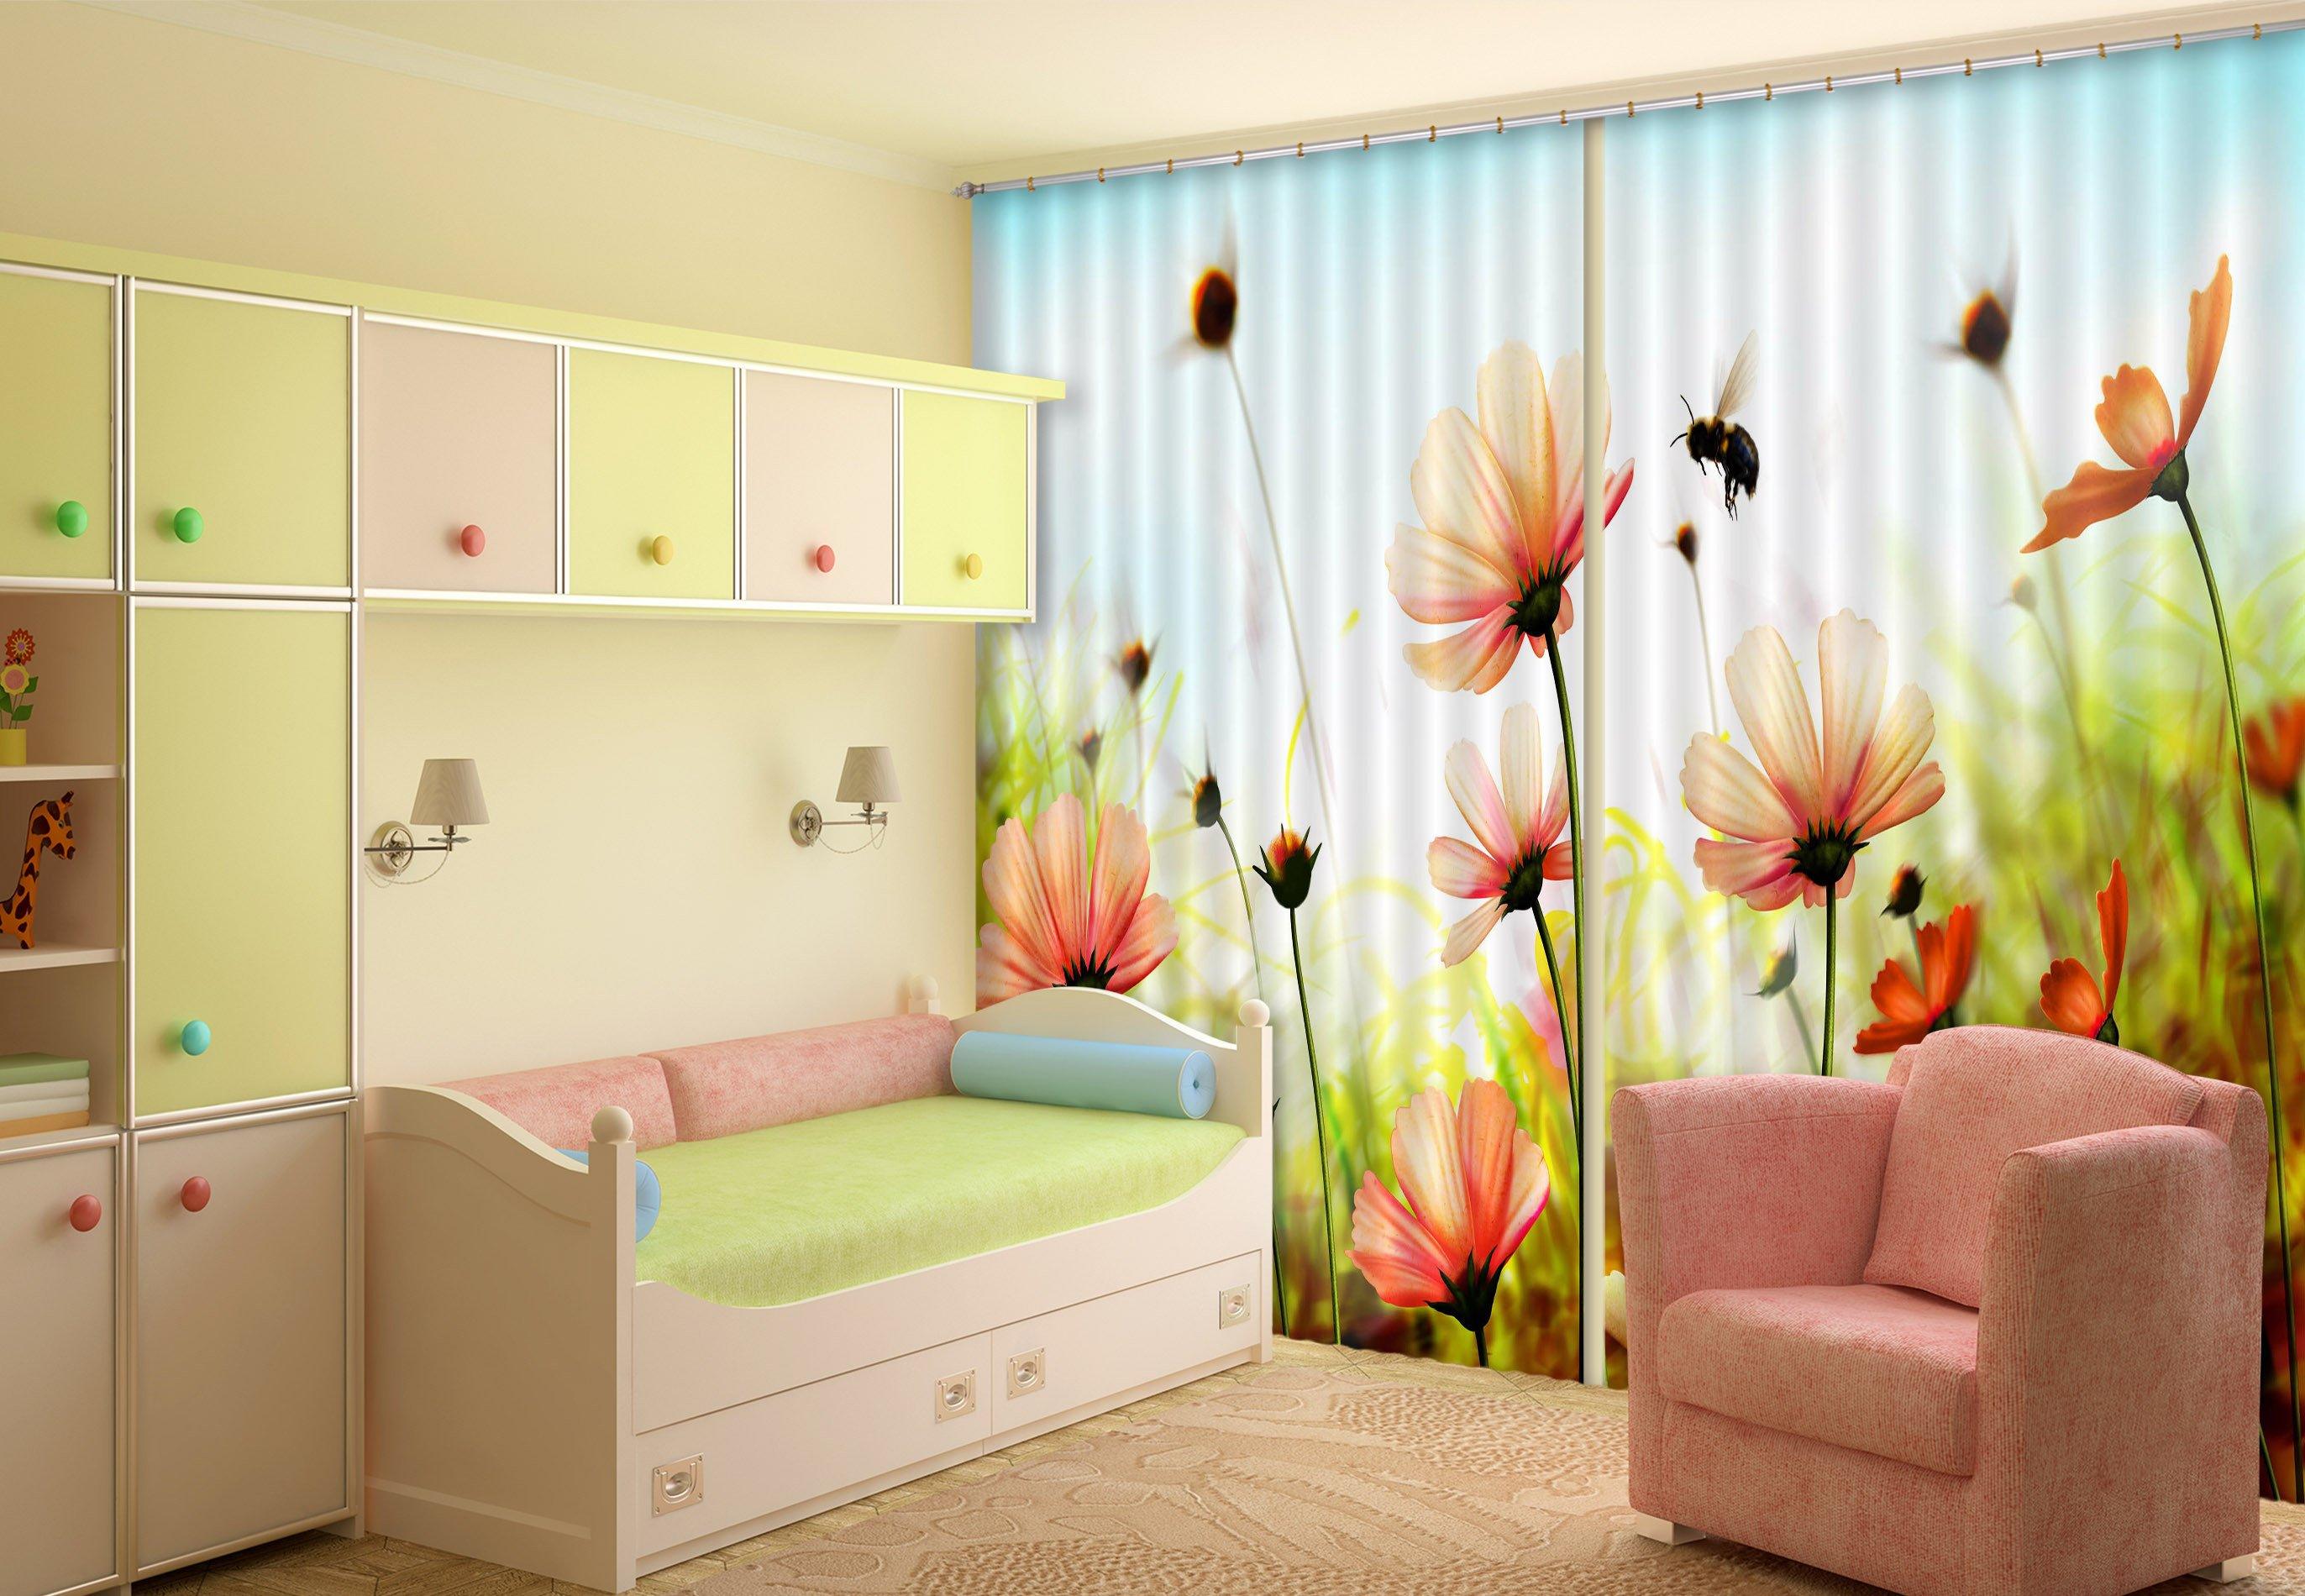 3D Flowers And Bee 284 Curtains Drapes Wallpaper AJ Wallpaper 